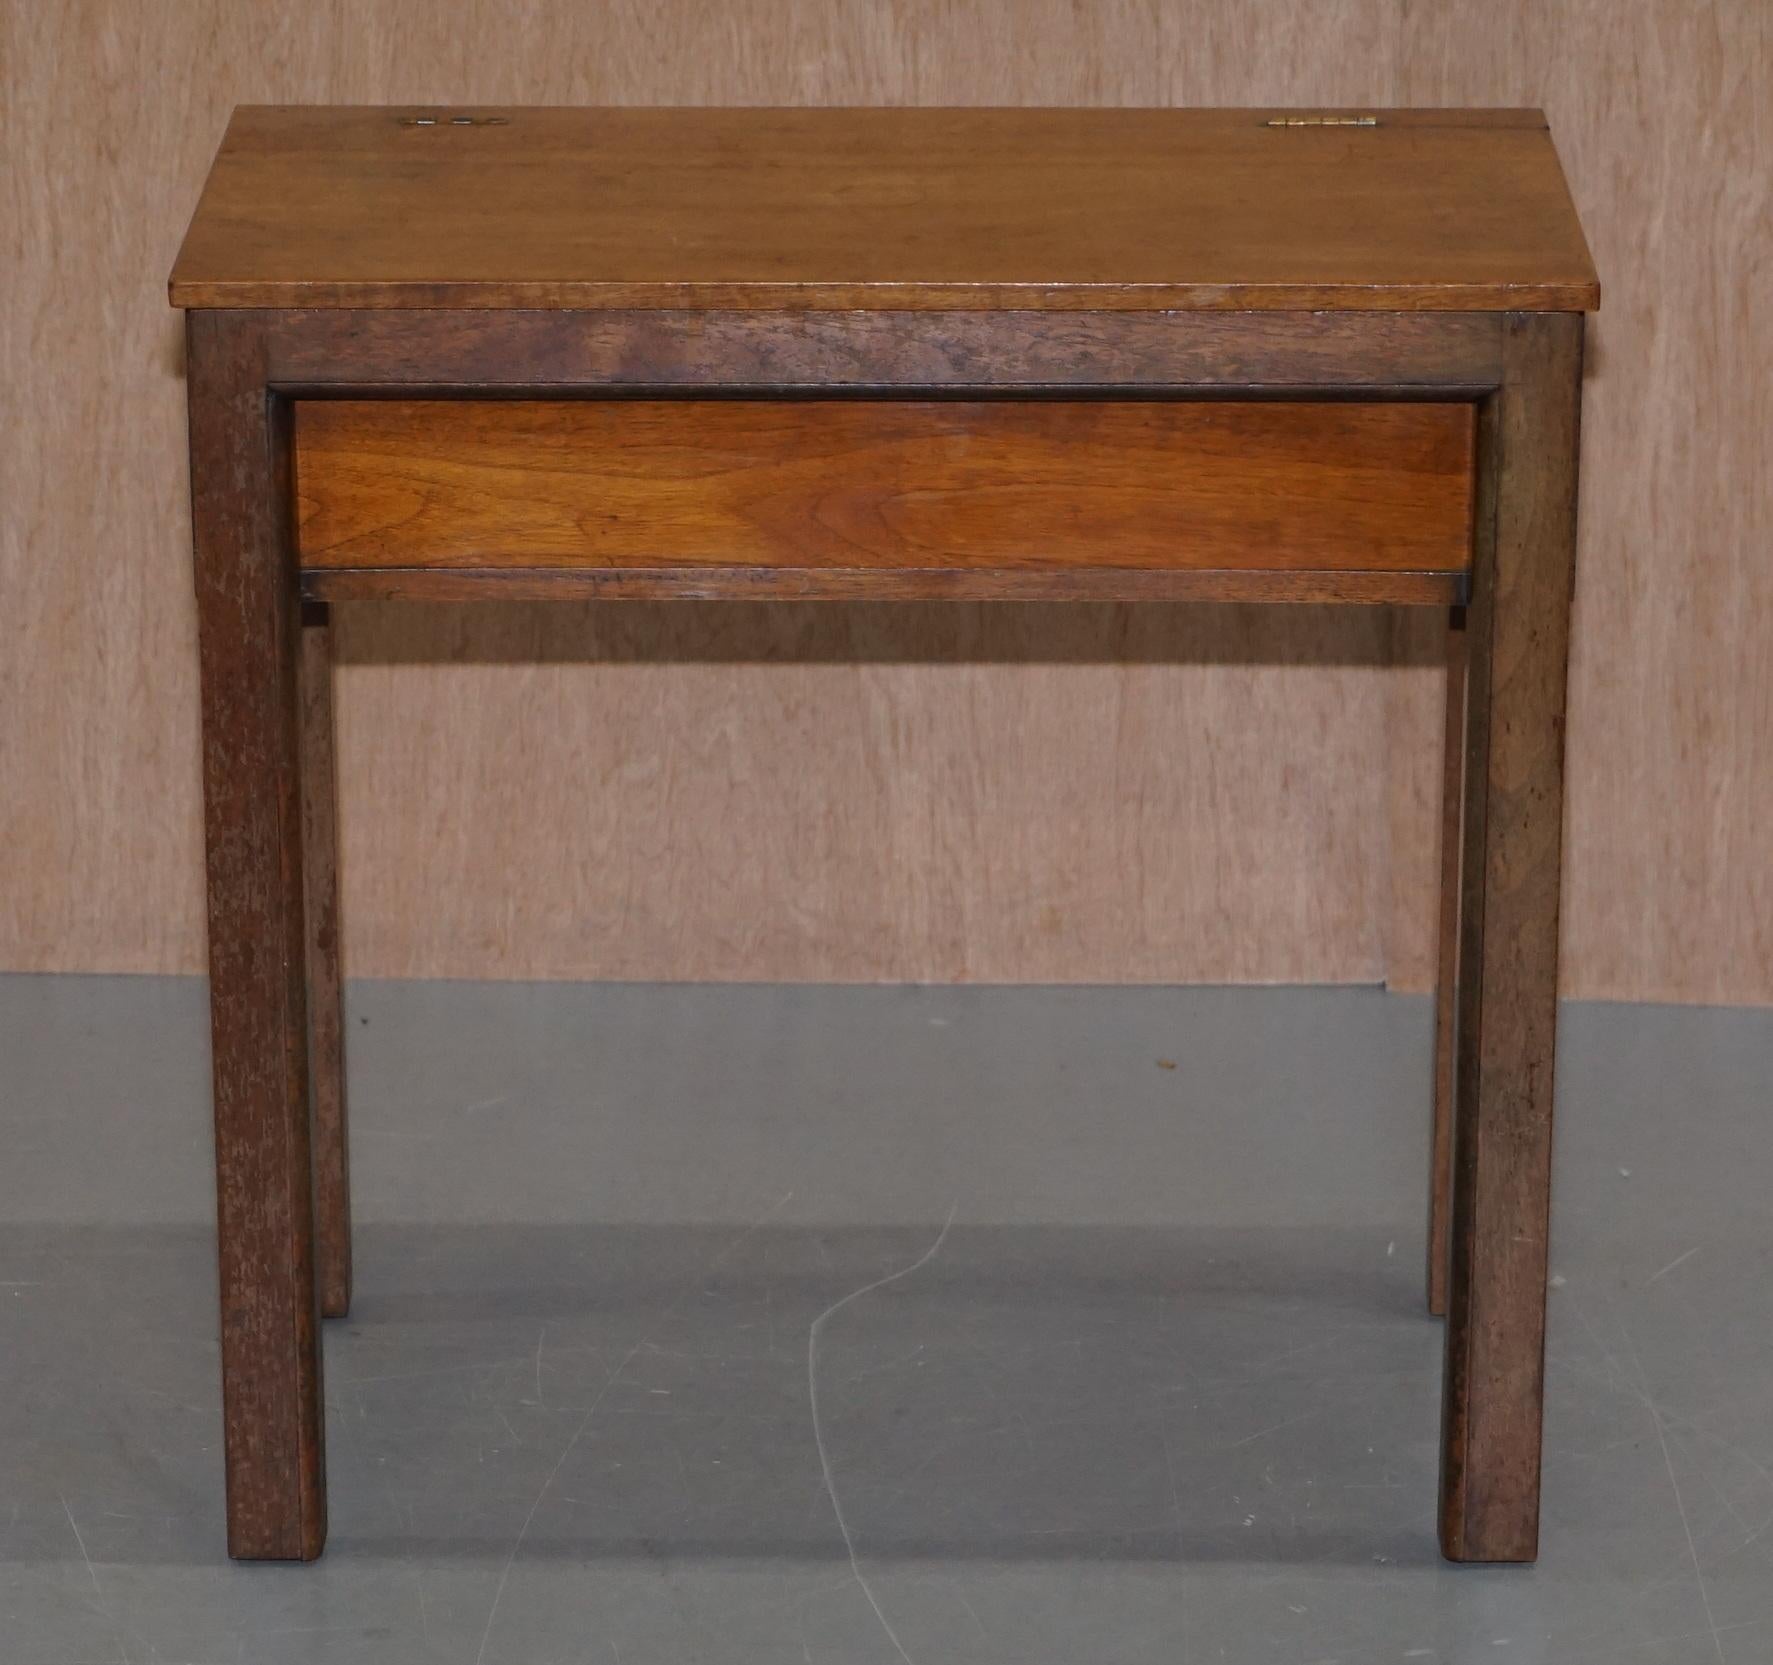 We are delighted to offer for sale this lovely original Edwardian solid English oak children’s school writing desk 

A well made decorative piece, its very utilitarian and works as well today as it did when new. The internal storage has dividers